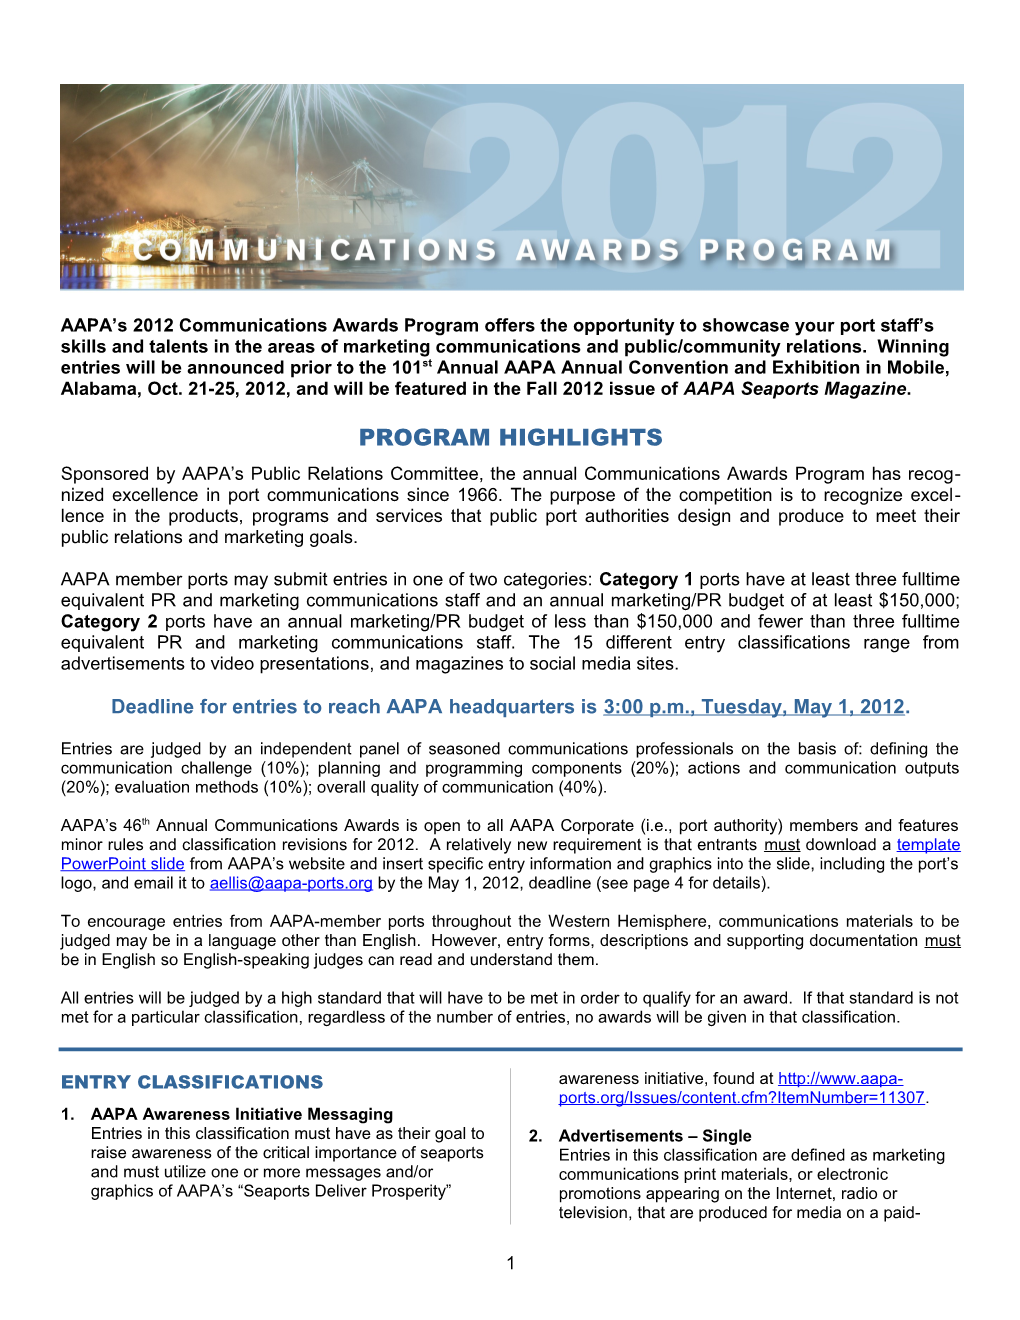 AAPA S 2012 Communications Awards Program Offers the Opportunity to Showcase Your Port